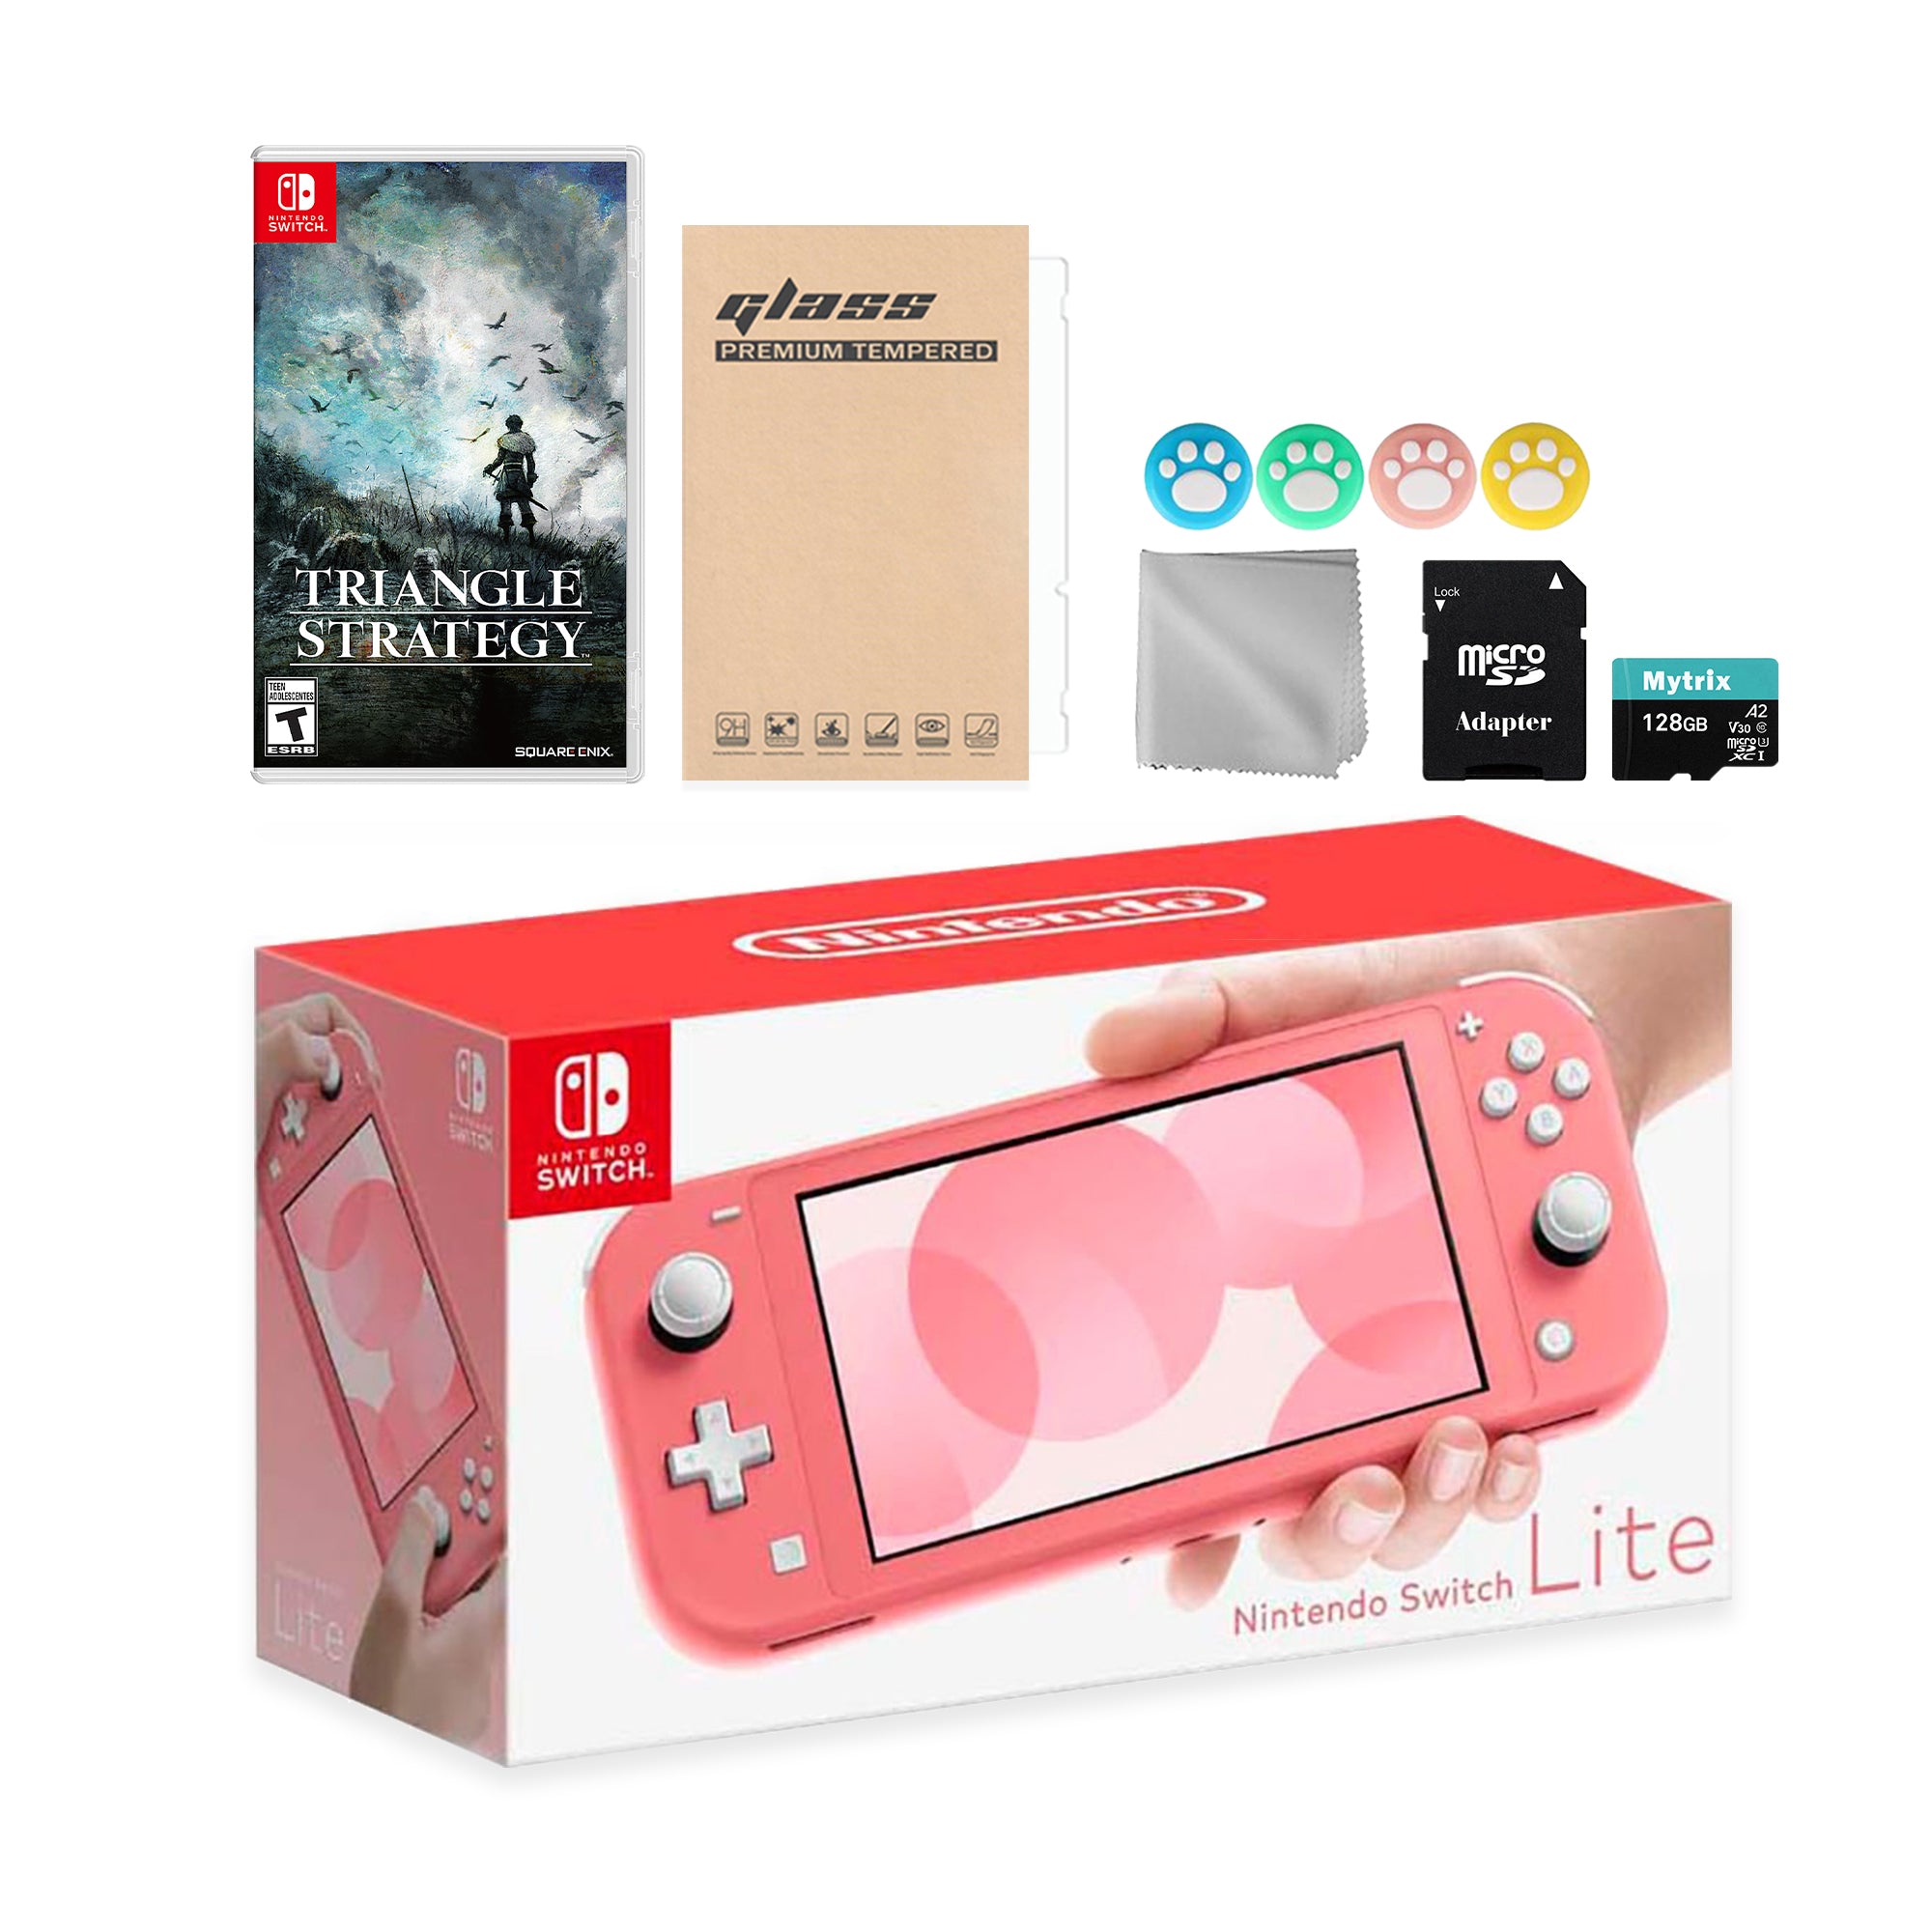 Nintendo Switch Mario Kart 8 Deluxe Bundle: Red Blue Console, Mario Kart 8 & Membership with Triangle Strategy with Mytrix 128GB Micro-SD Card and Accessories